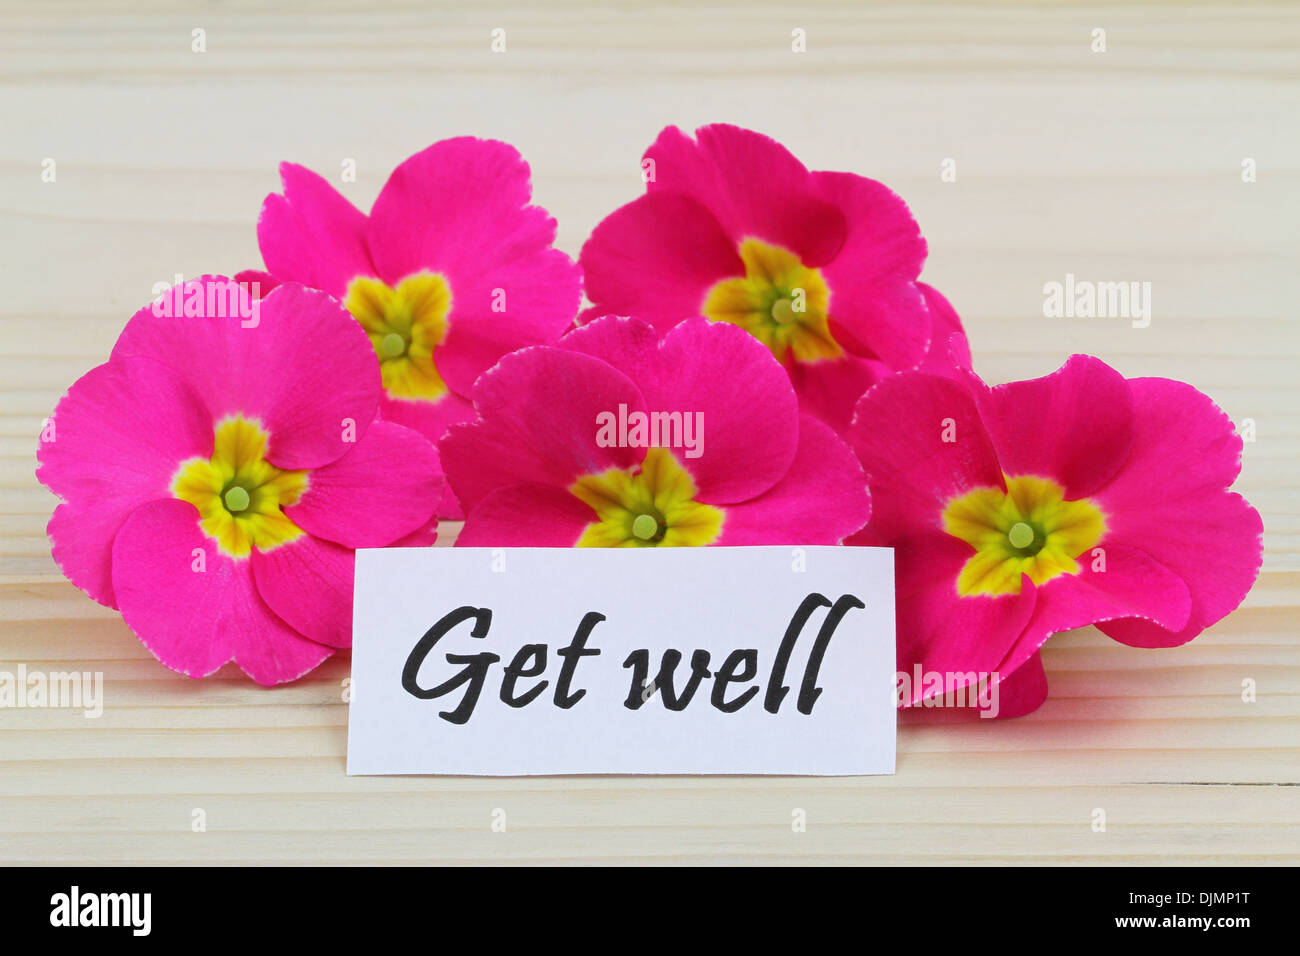 Get well card with pink primula flowers Stock Photo